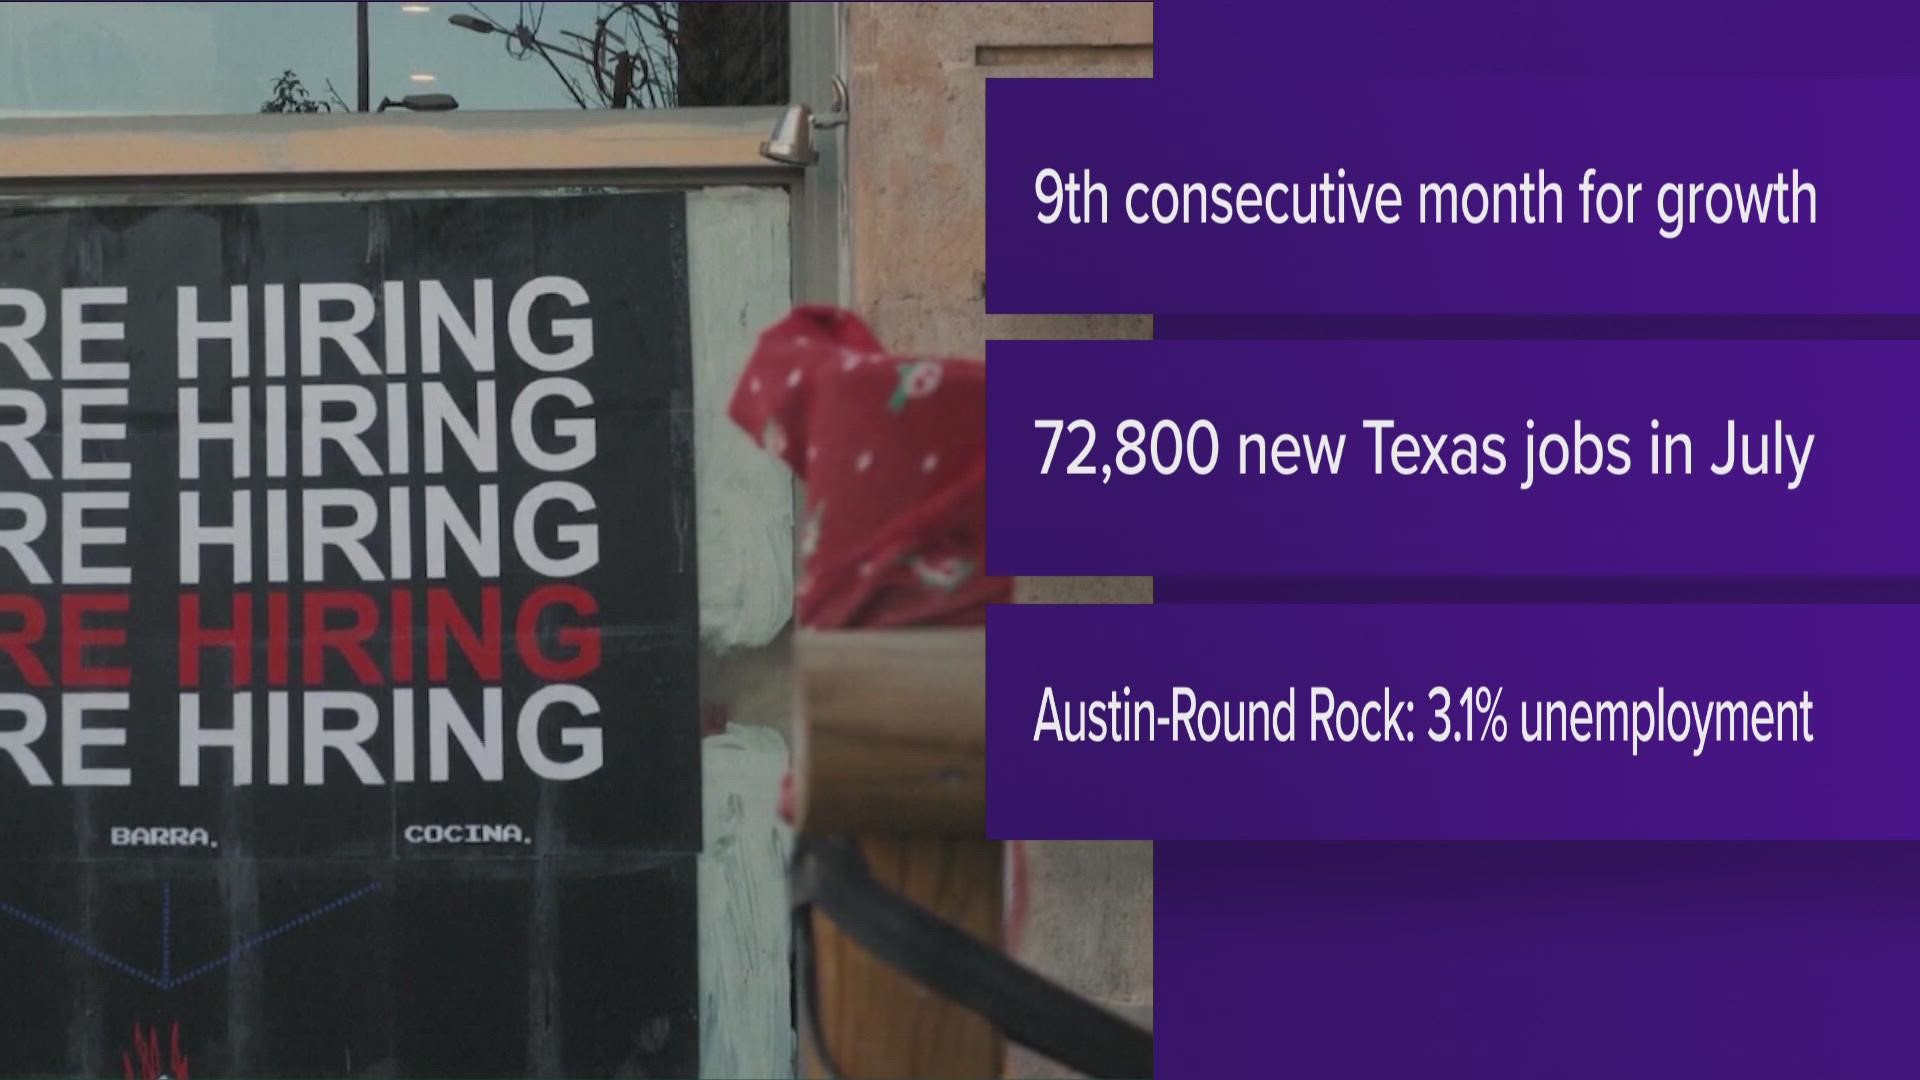 There are currently around 41,457 unemployed residents in the Austin-Round Rock area.